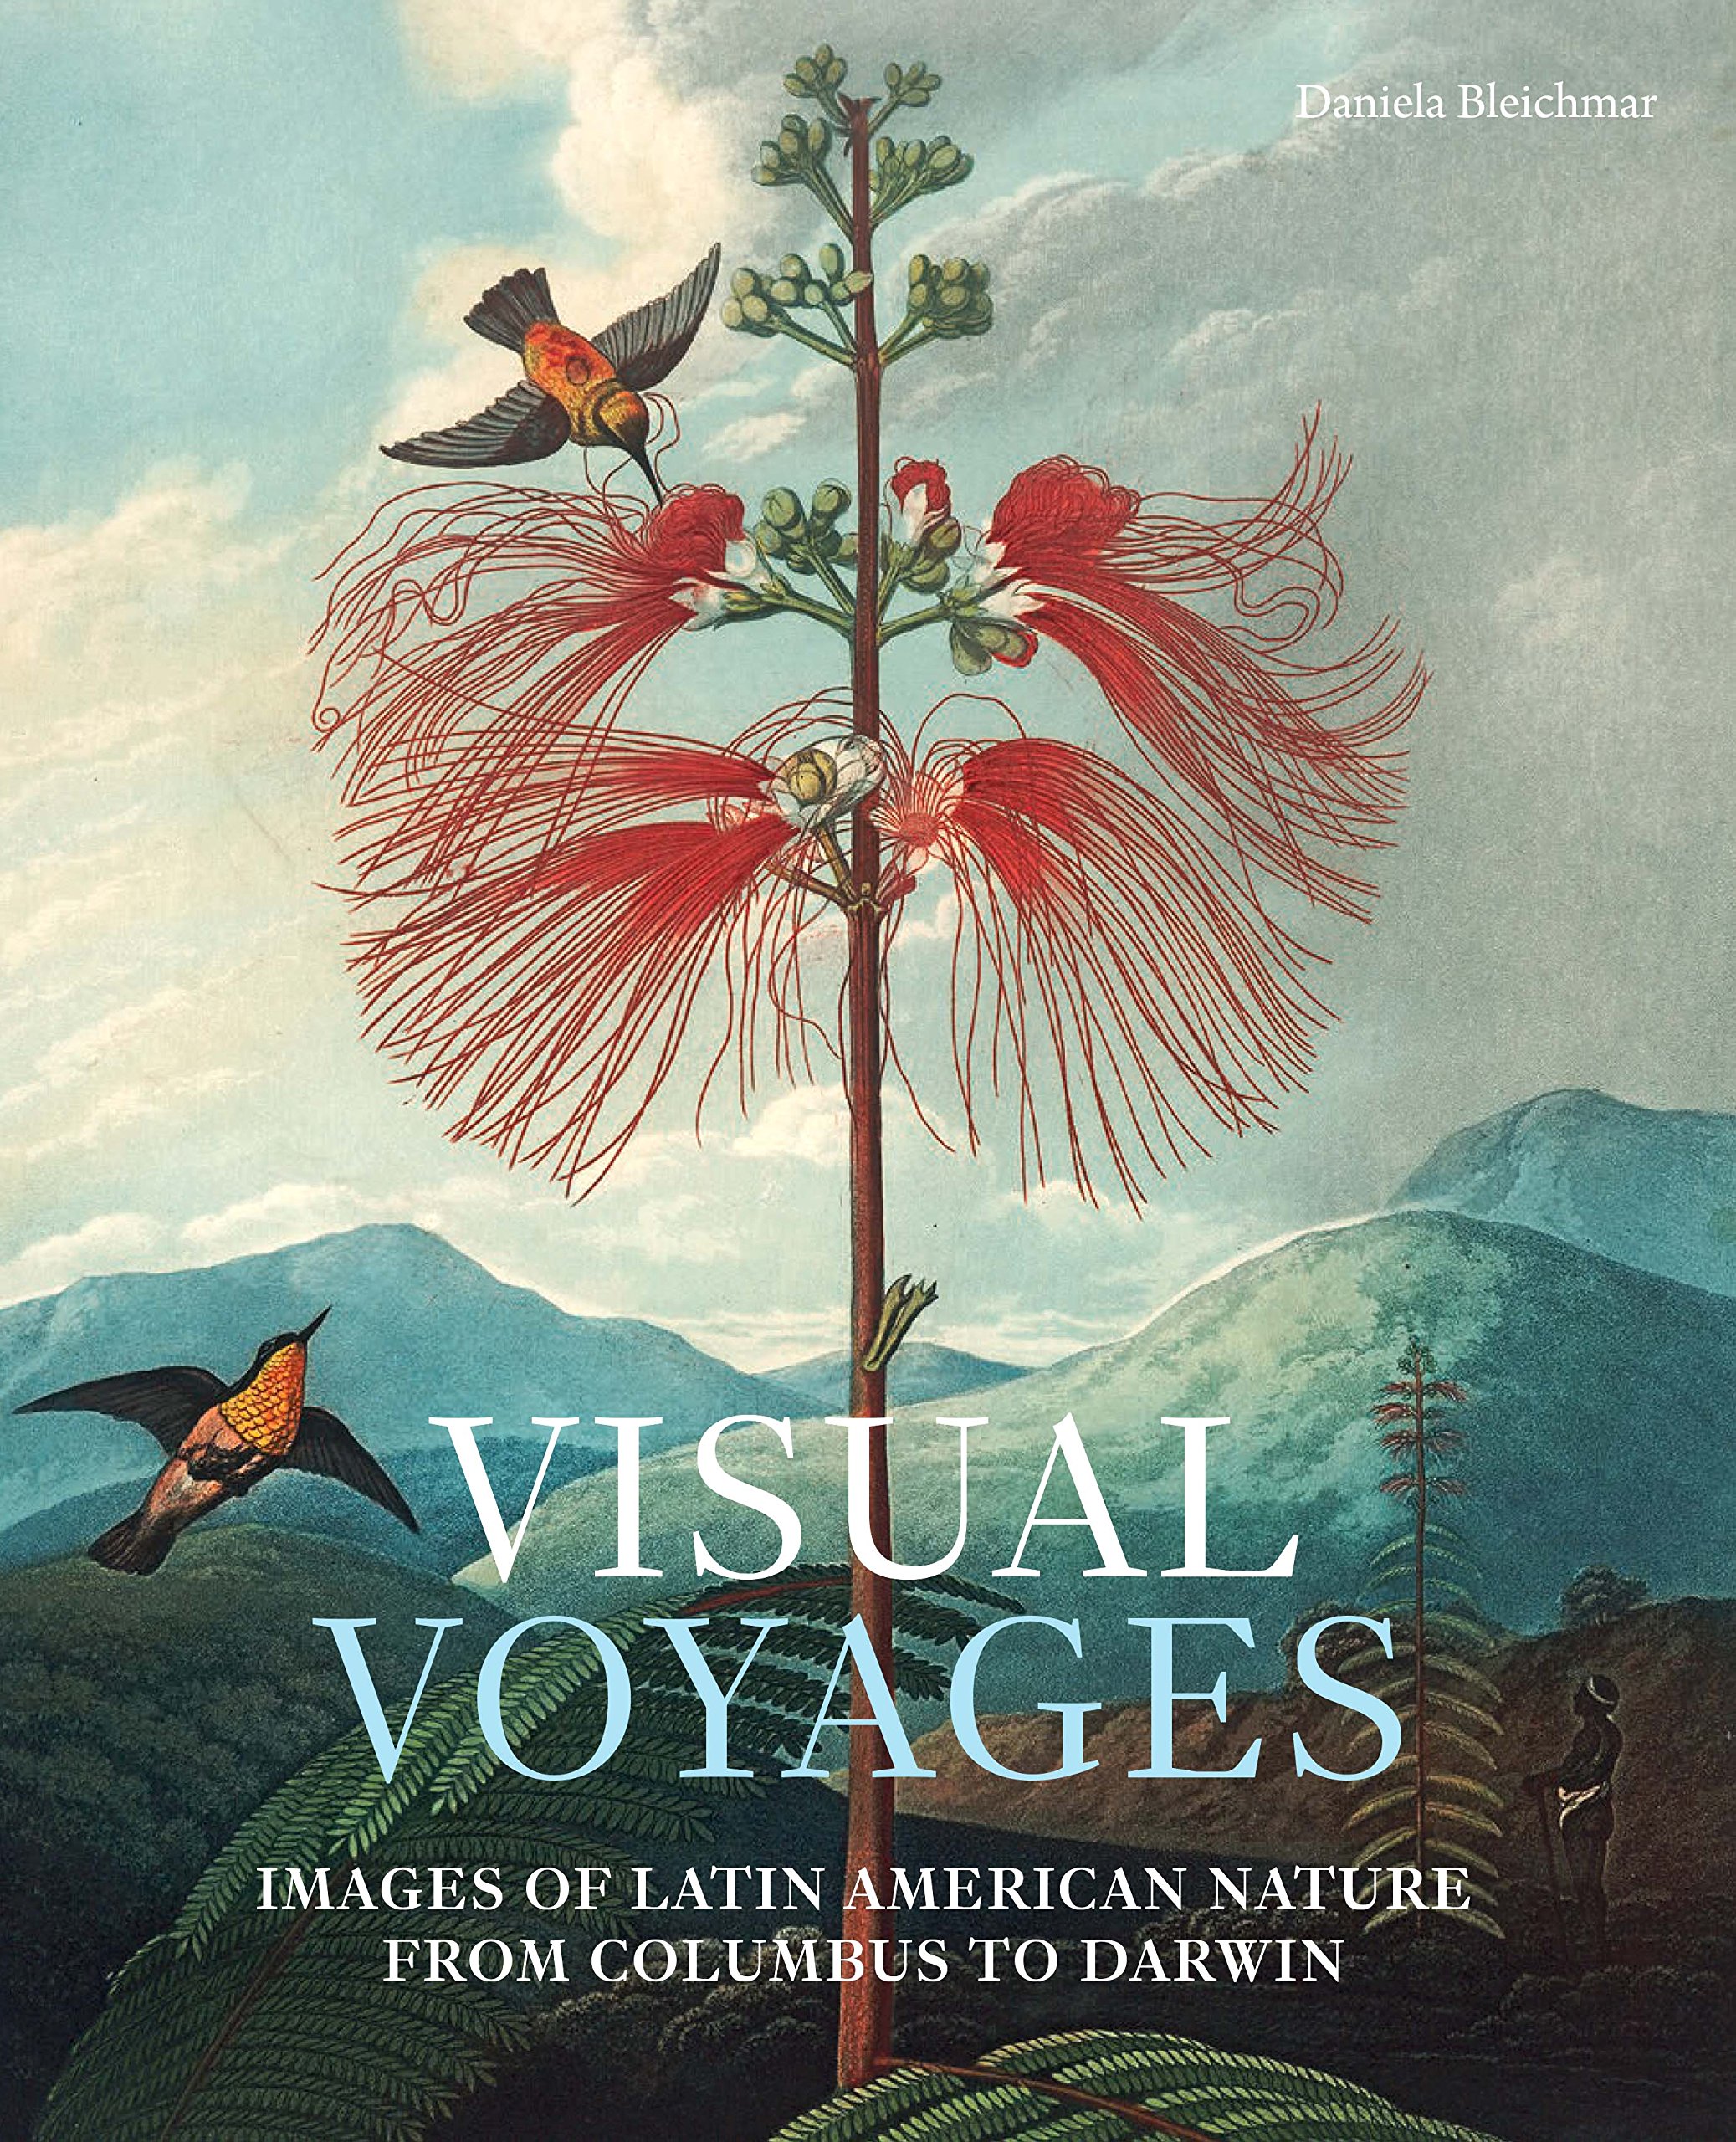 Visual Voyages Images of Latin American Nature from Columbus to Darwin
Epub-Ebook